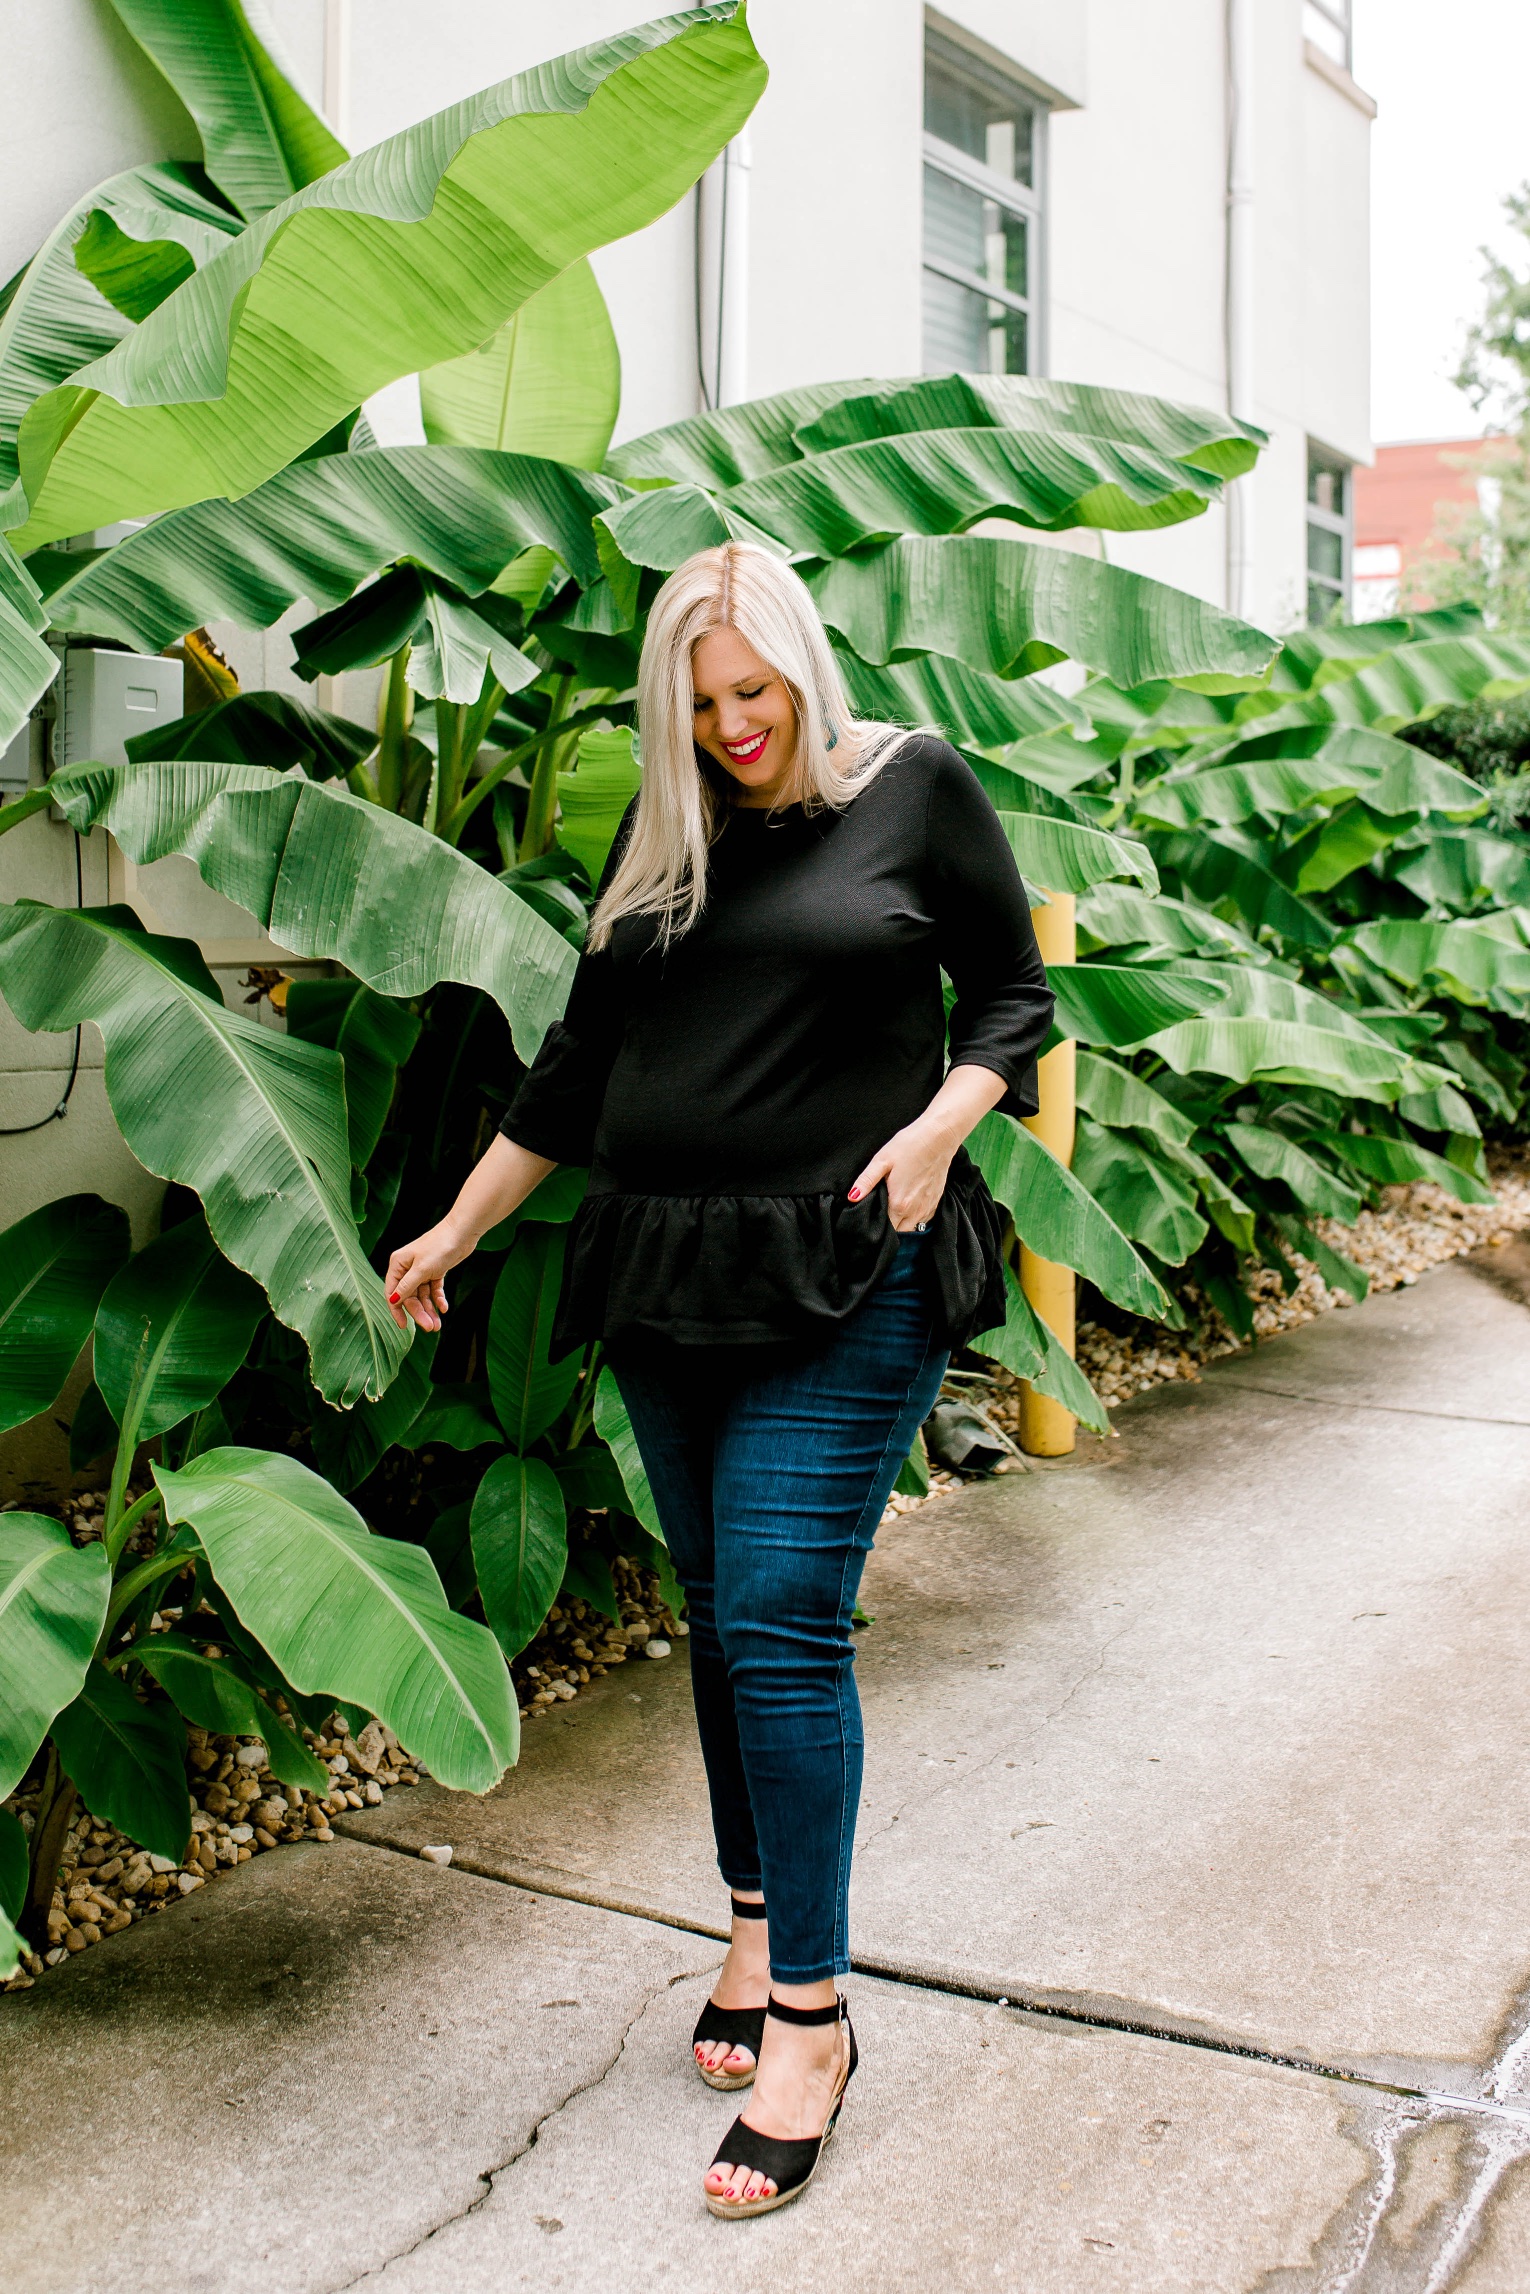 SO WHAT'S THE BIG DEAL ABOUT HIGH WAISTED JEANS? — House of Dorough